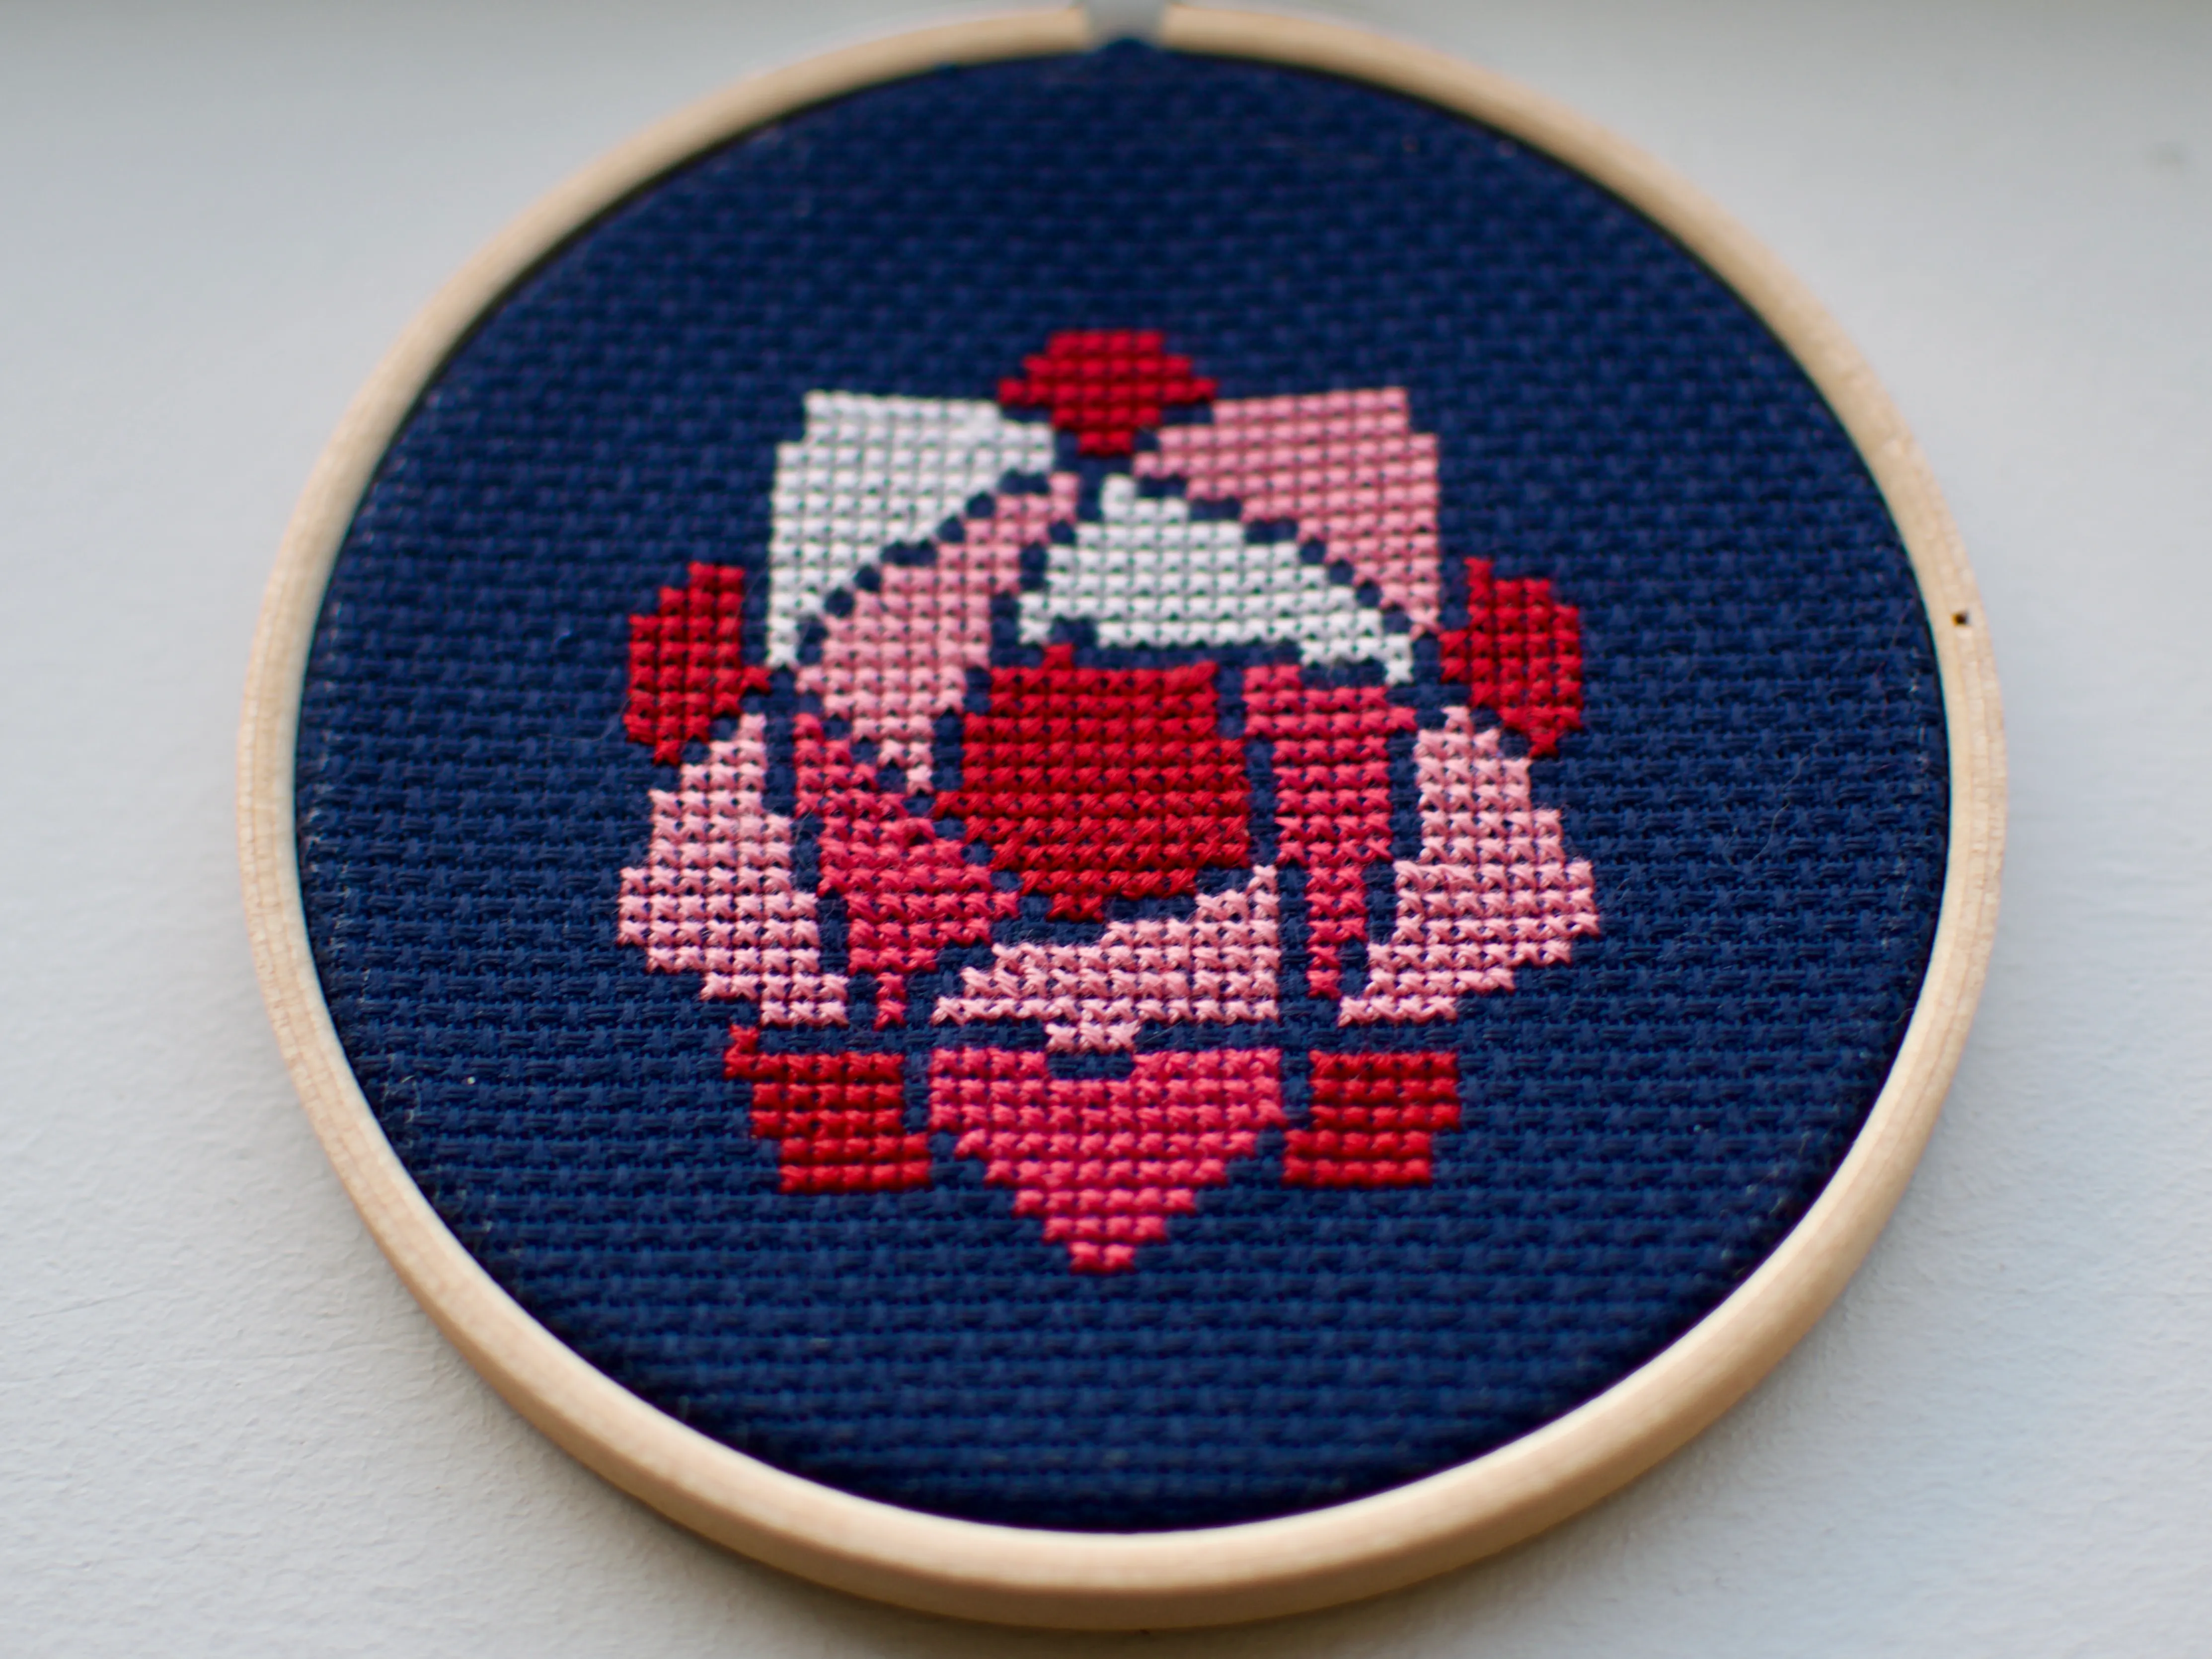 A small cross-stitch of a pink, roselike flower against a navy background.